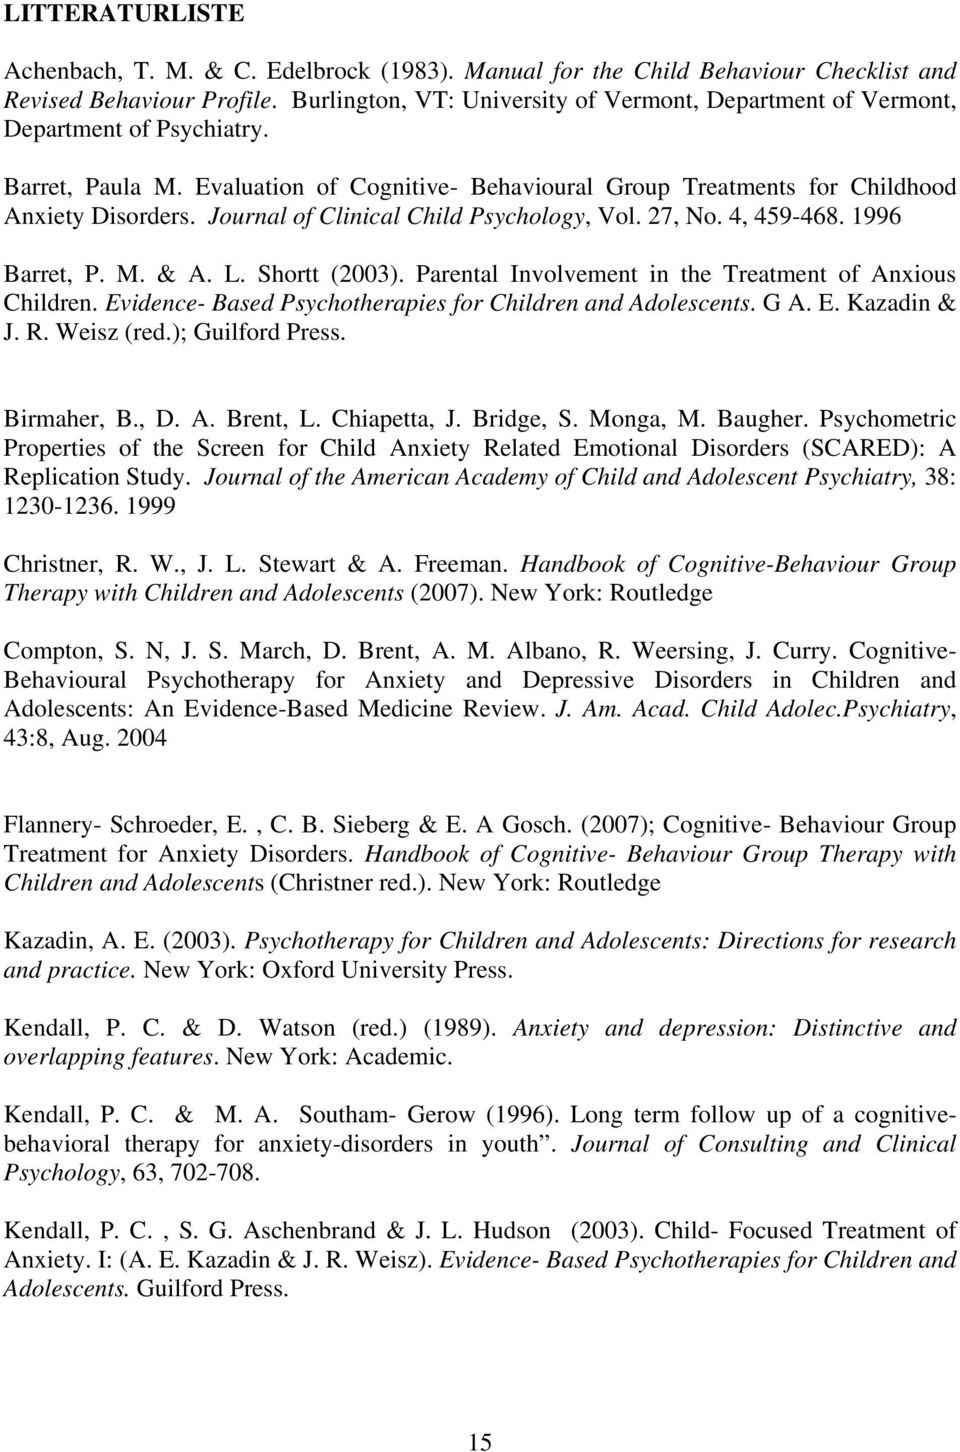 Journal of Clinical Child Psychology, Vol. 27, No. 4, 459-468. 1996 Barret, P. M. & A. L. Shortt (2003). Parental Involvement in the Treatment of Anxious Children.